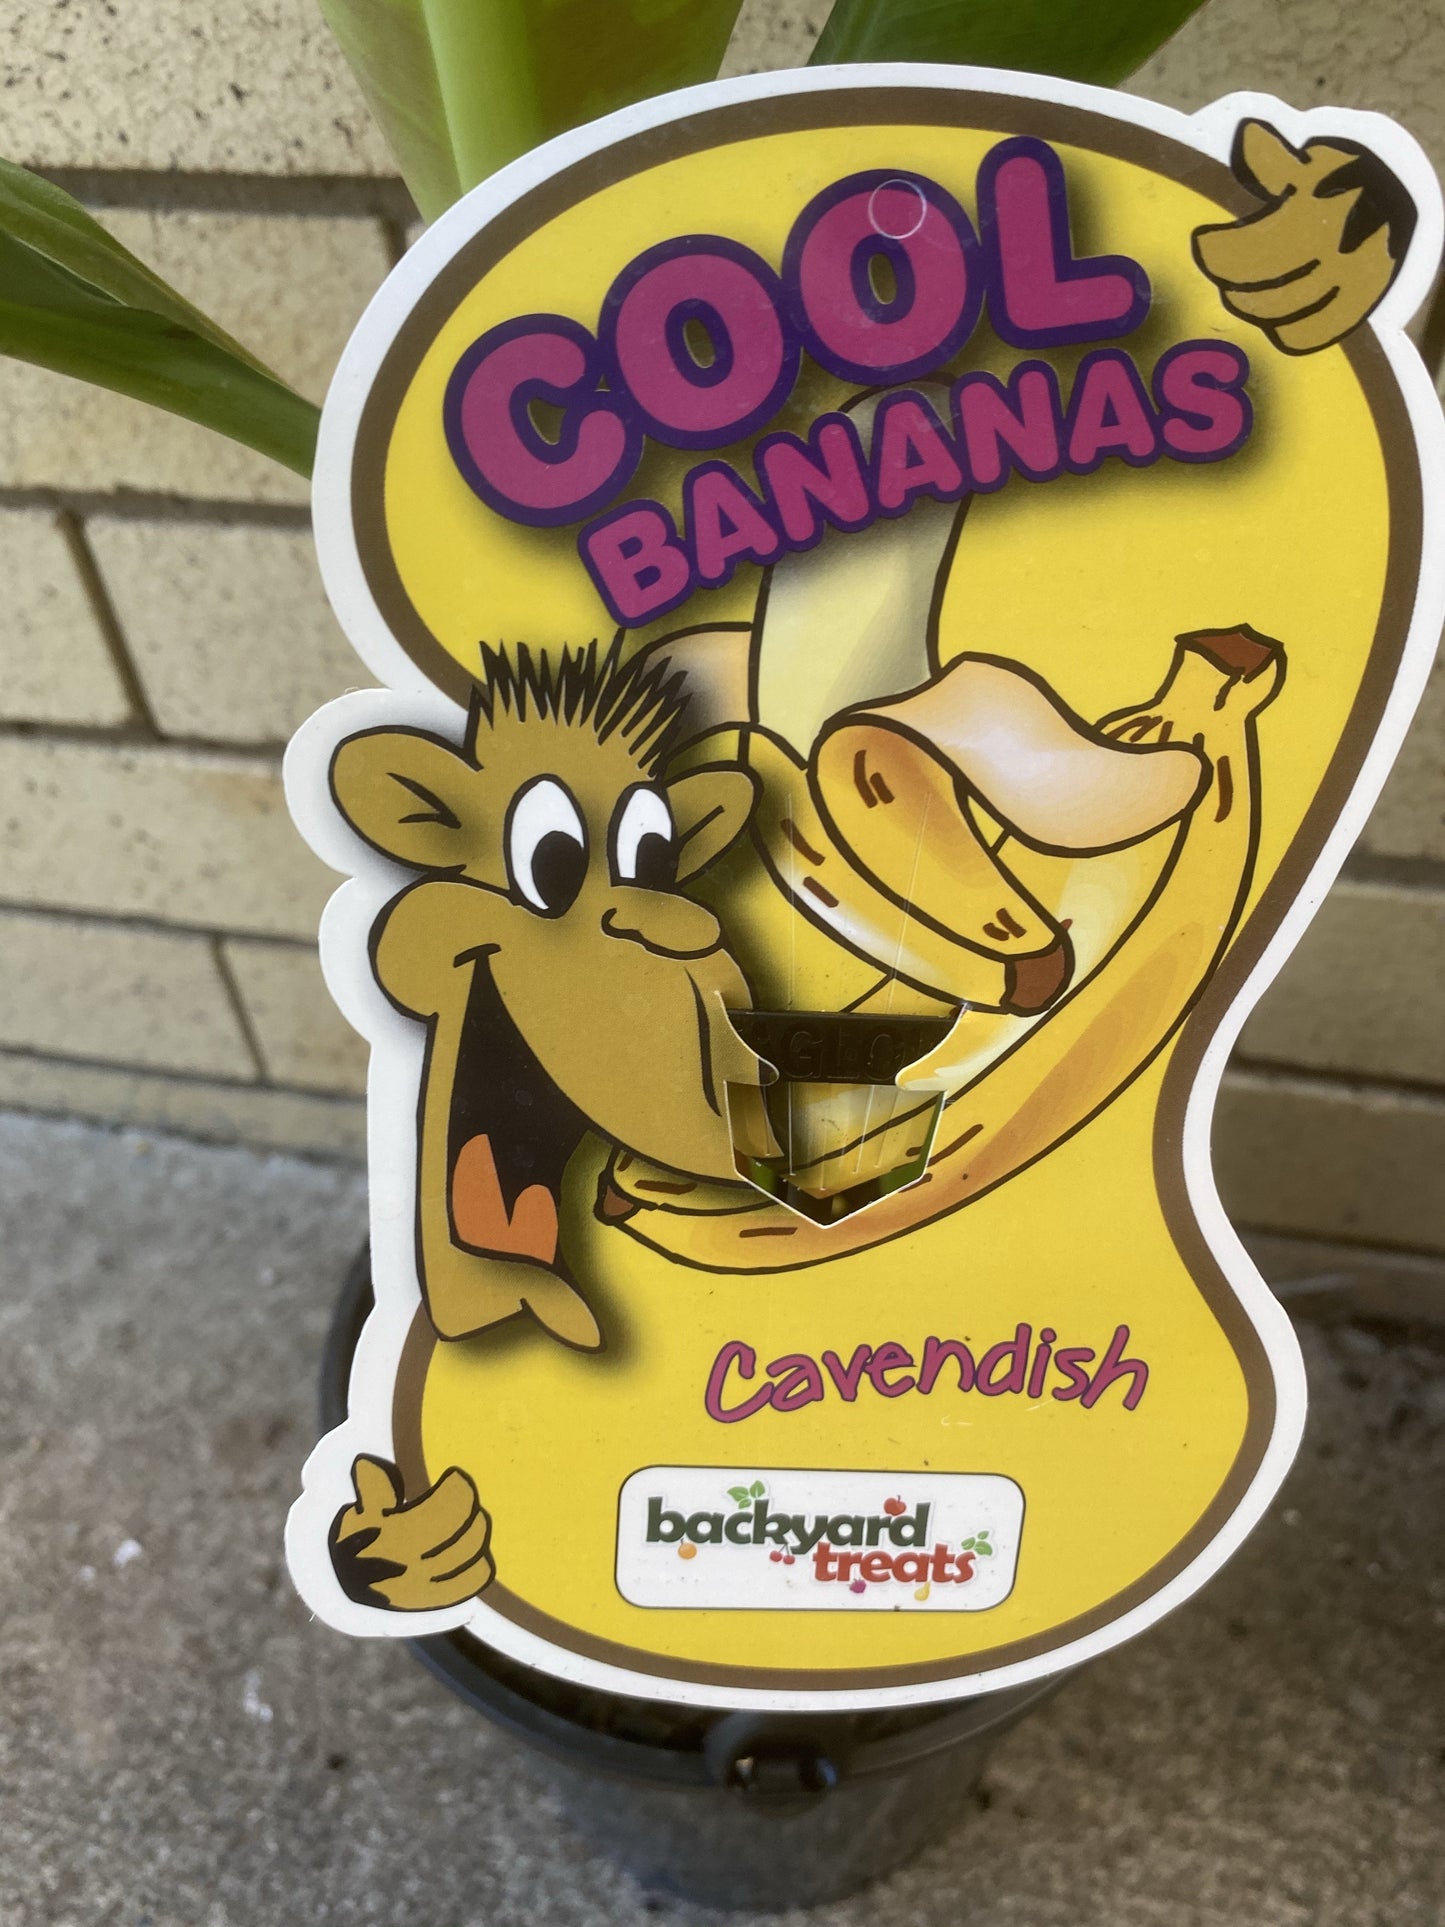 Banana - Cavendish: RESTRICTED TO S.E. QLD